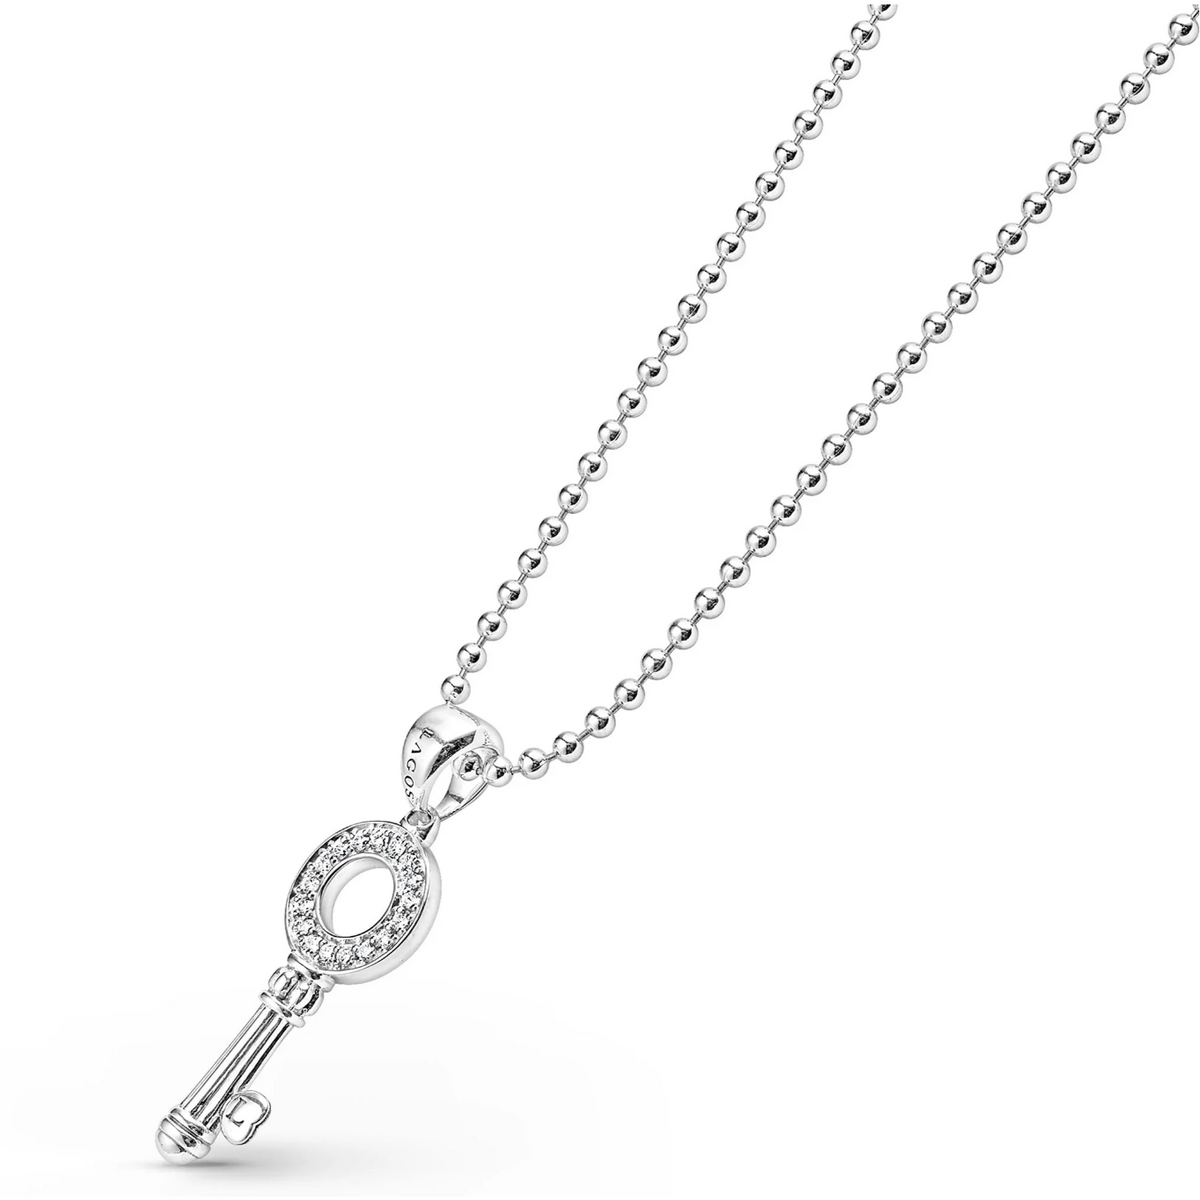 Lagos Signature Sterling Silver Key Pendant Necklace, 34